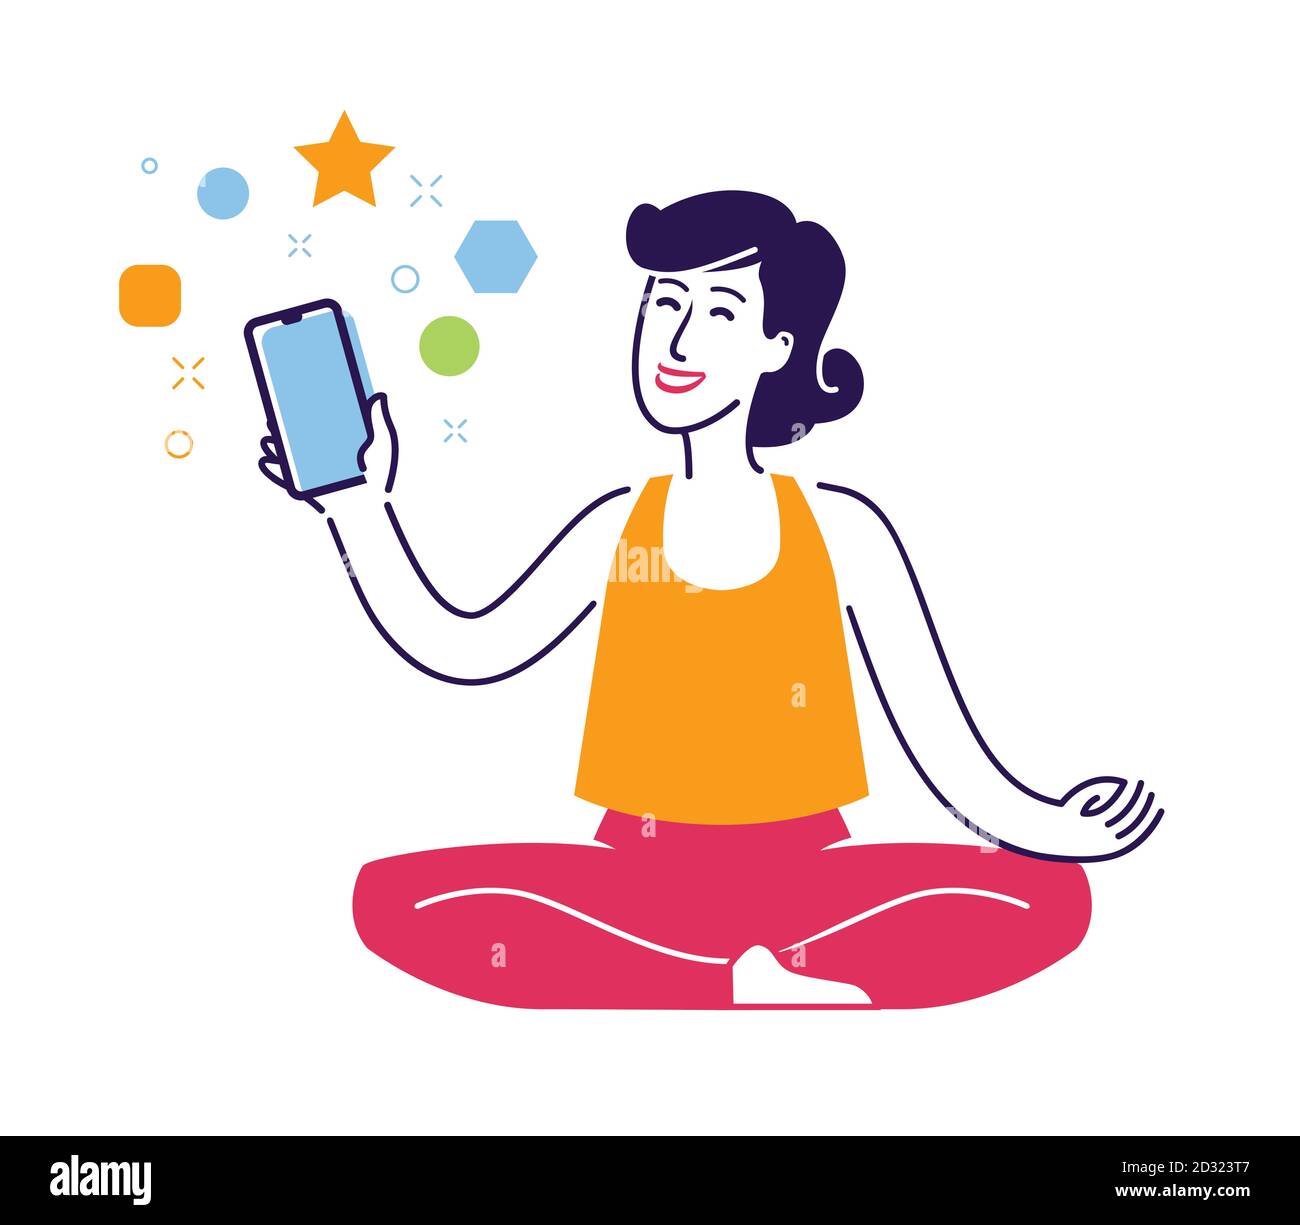 Young woman sitting in lotus position with smartphone in hand. Internet, web application symbol Stock Vector